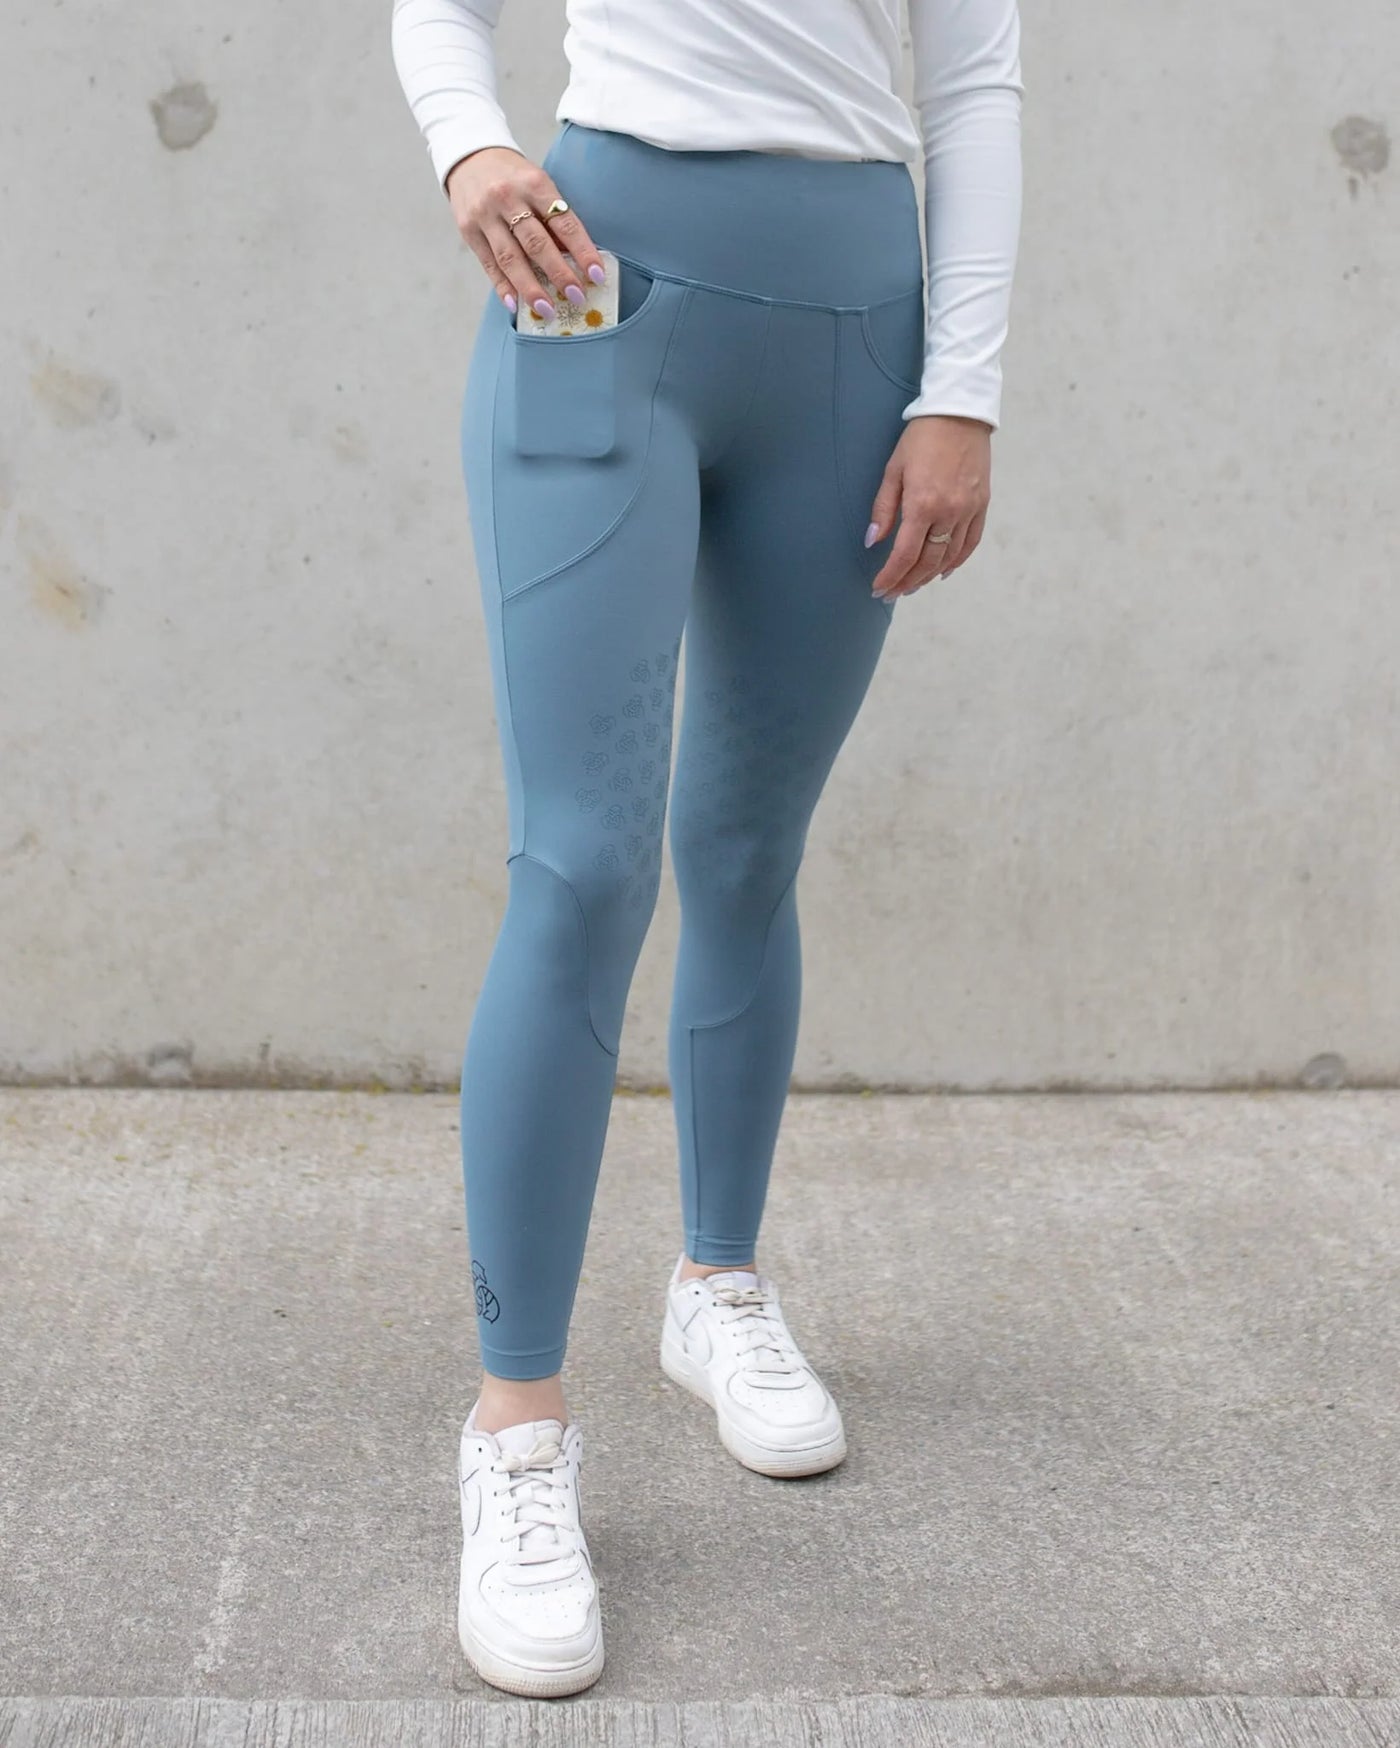 EquiEire Aisling Pull On Leggings - Blue